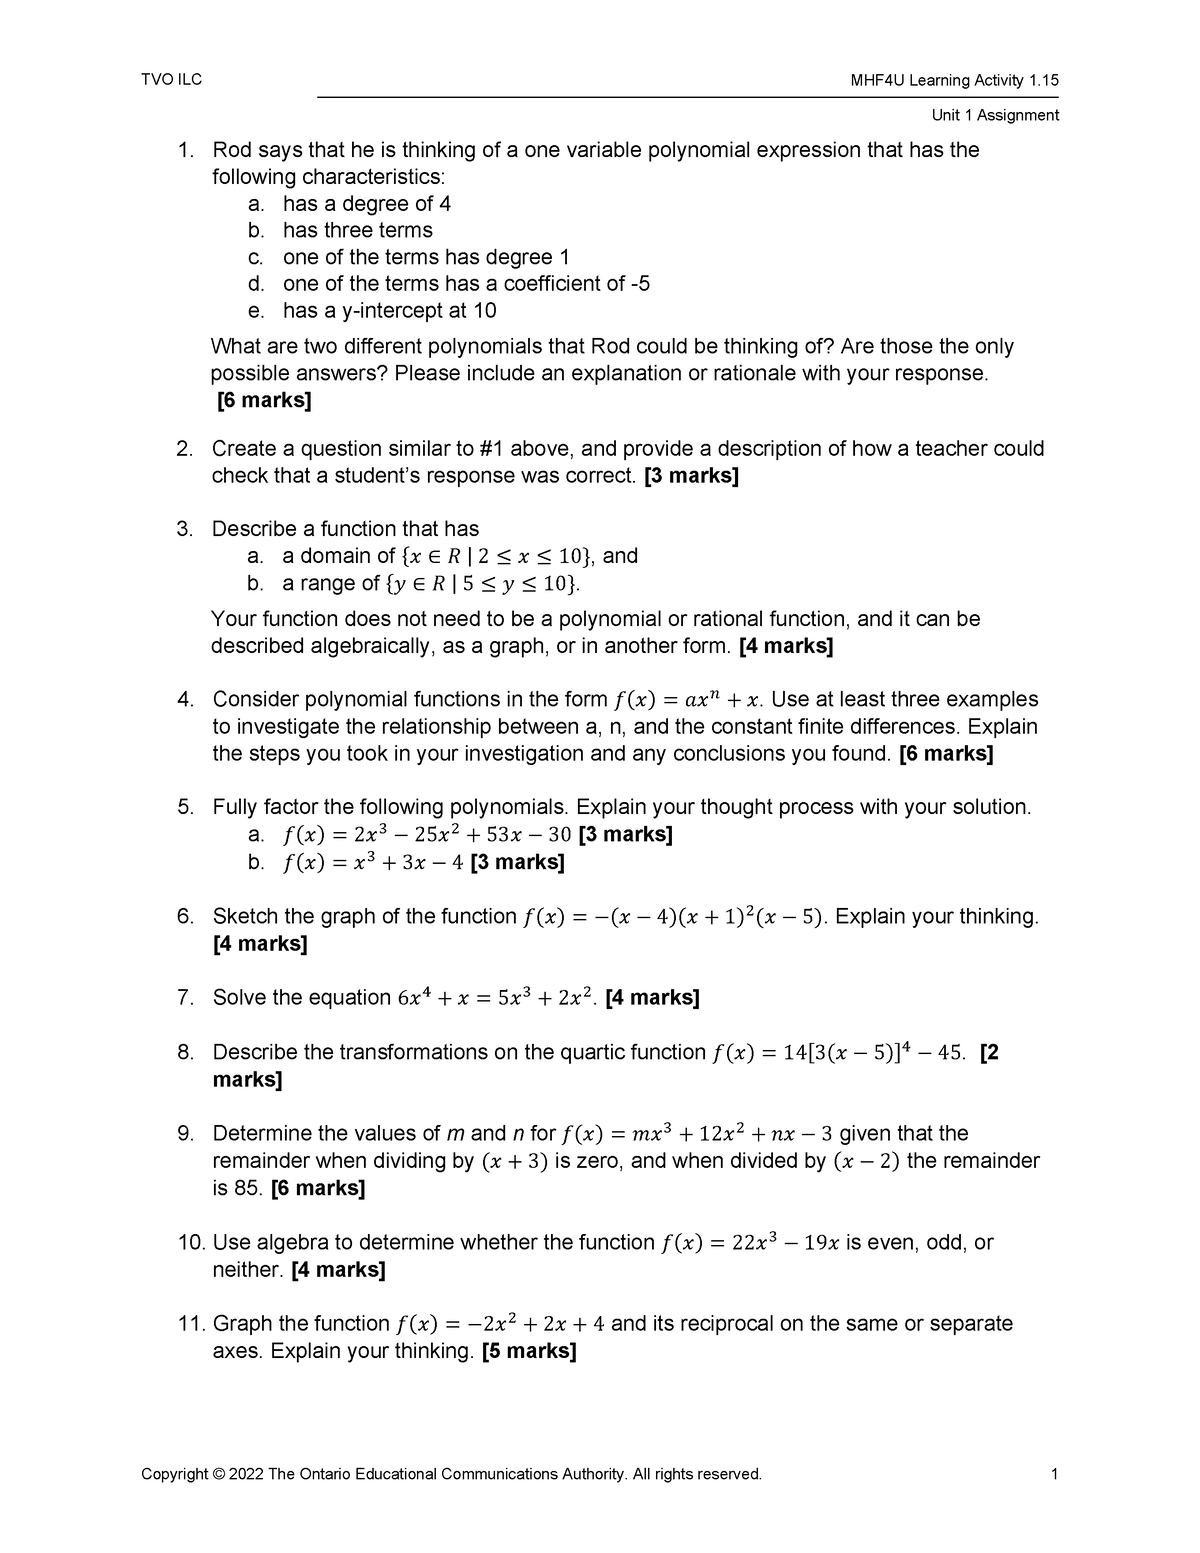 A1Doc - Understanding calculus - MHF4U Learning Activity 1. Unit 1 ...